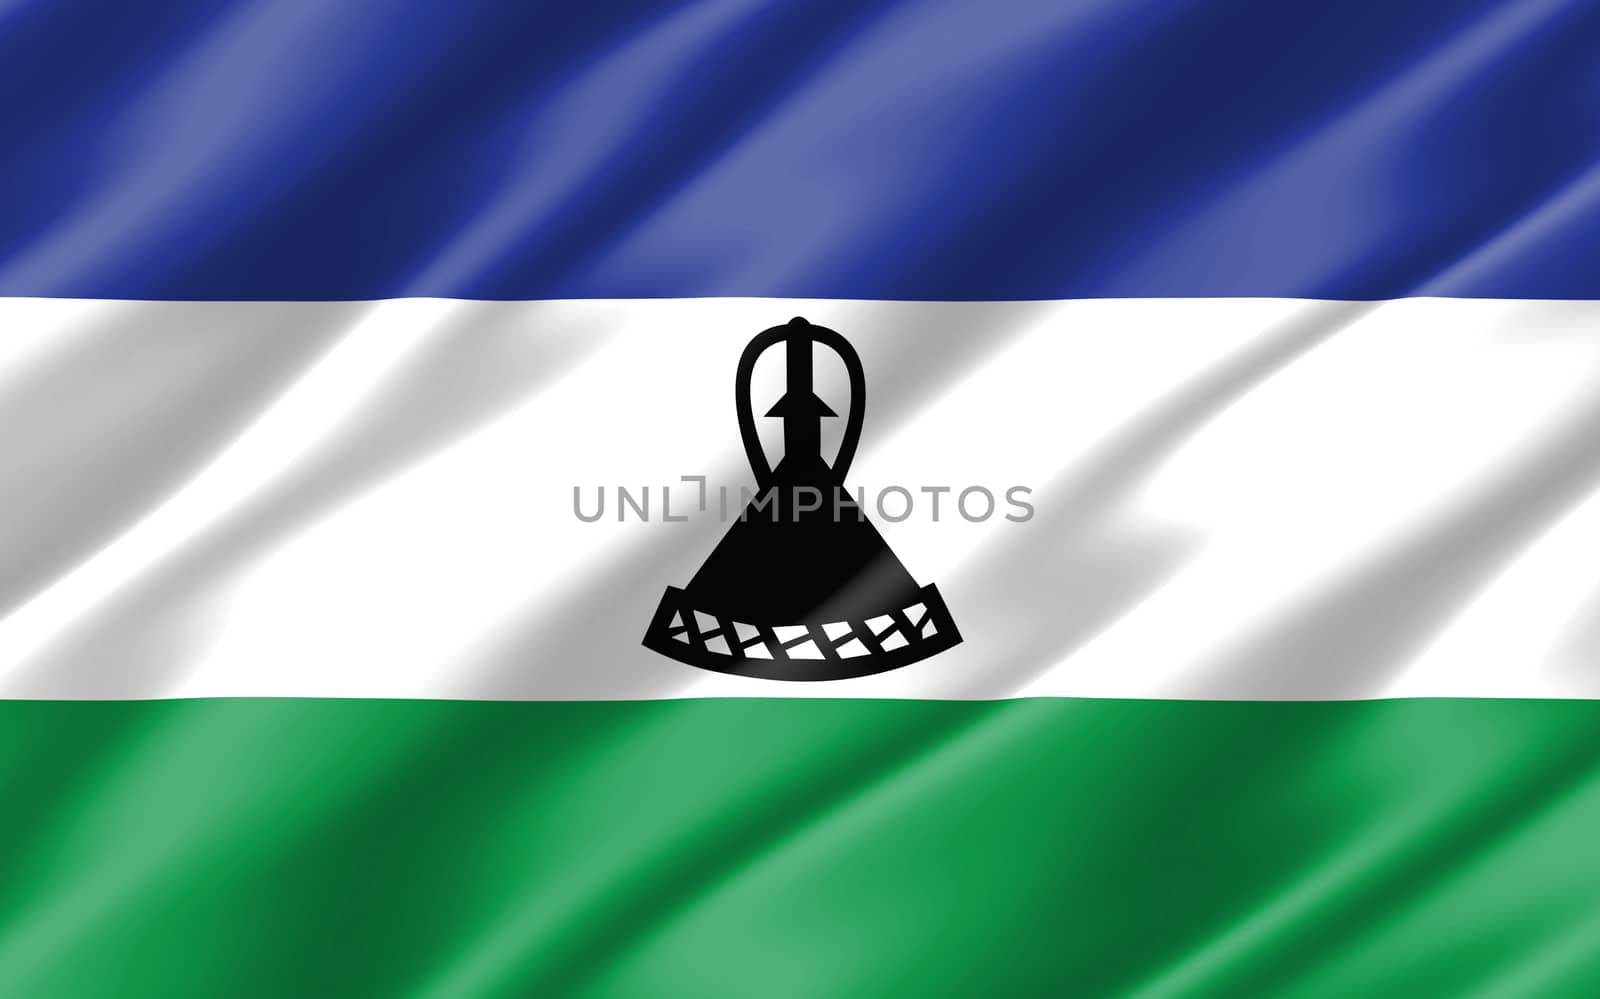 Silk wavy flag of Lesotho graphic. Wavy Basotho flag illustration. Rippled Lesotho country flag is a symbol of freedom, patriotism and independence.